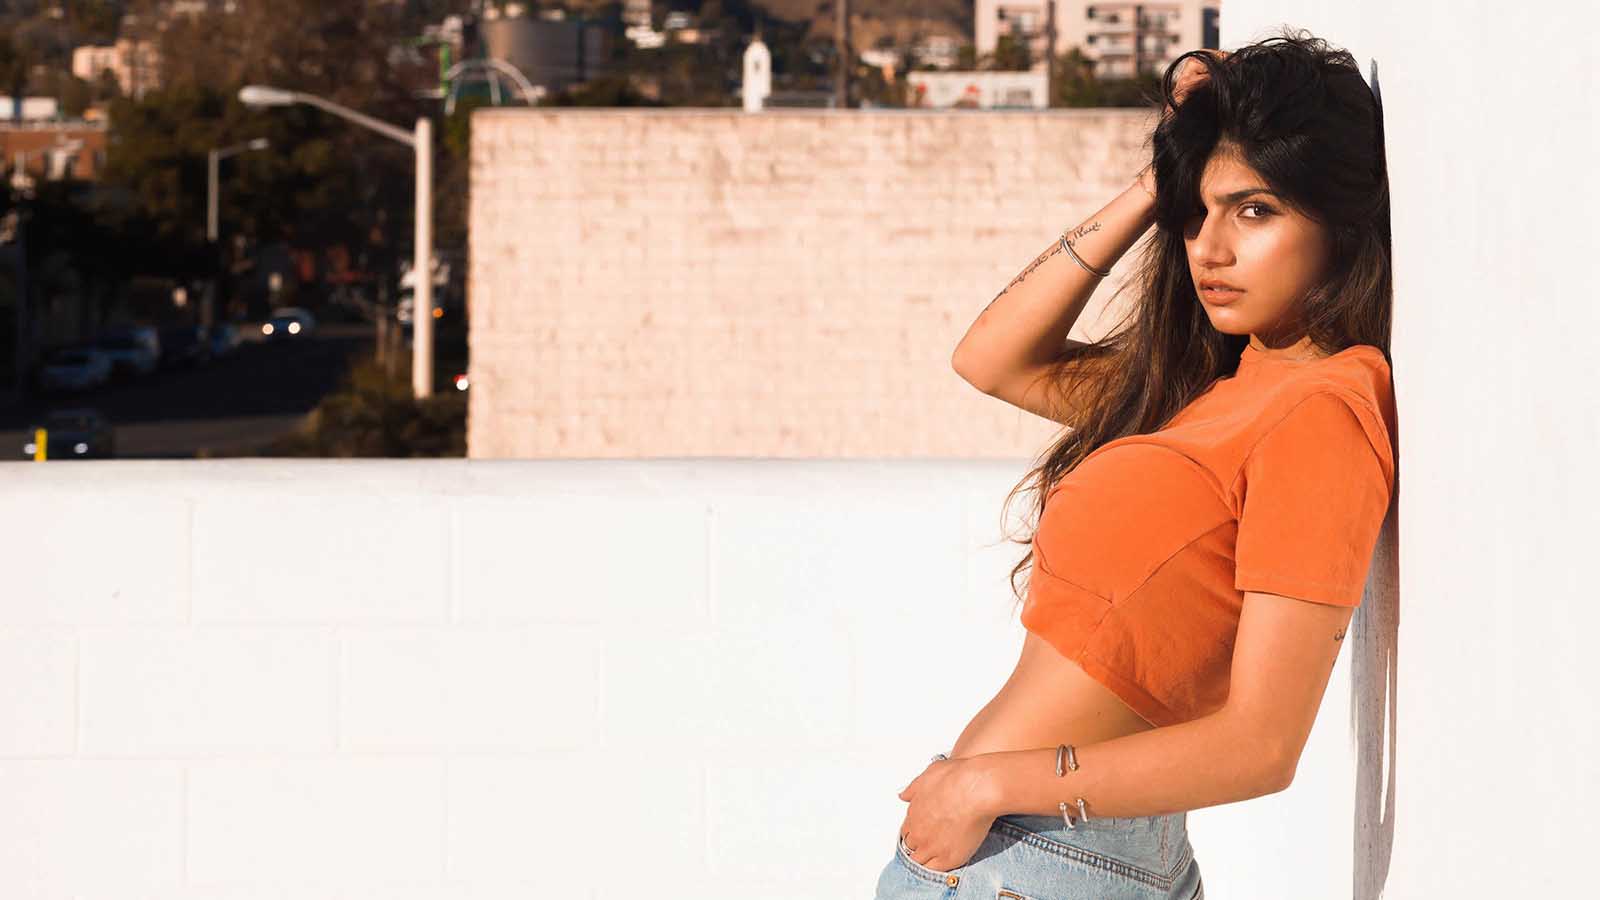 In their campaign against Mia Khalifa, Bangbros is bringing the receipts about her net worth in the porn industry, how many scenes she did, and more.